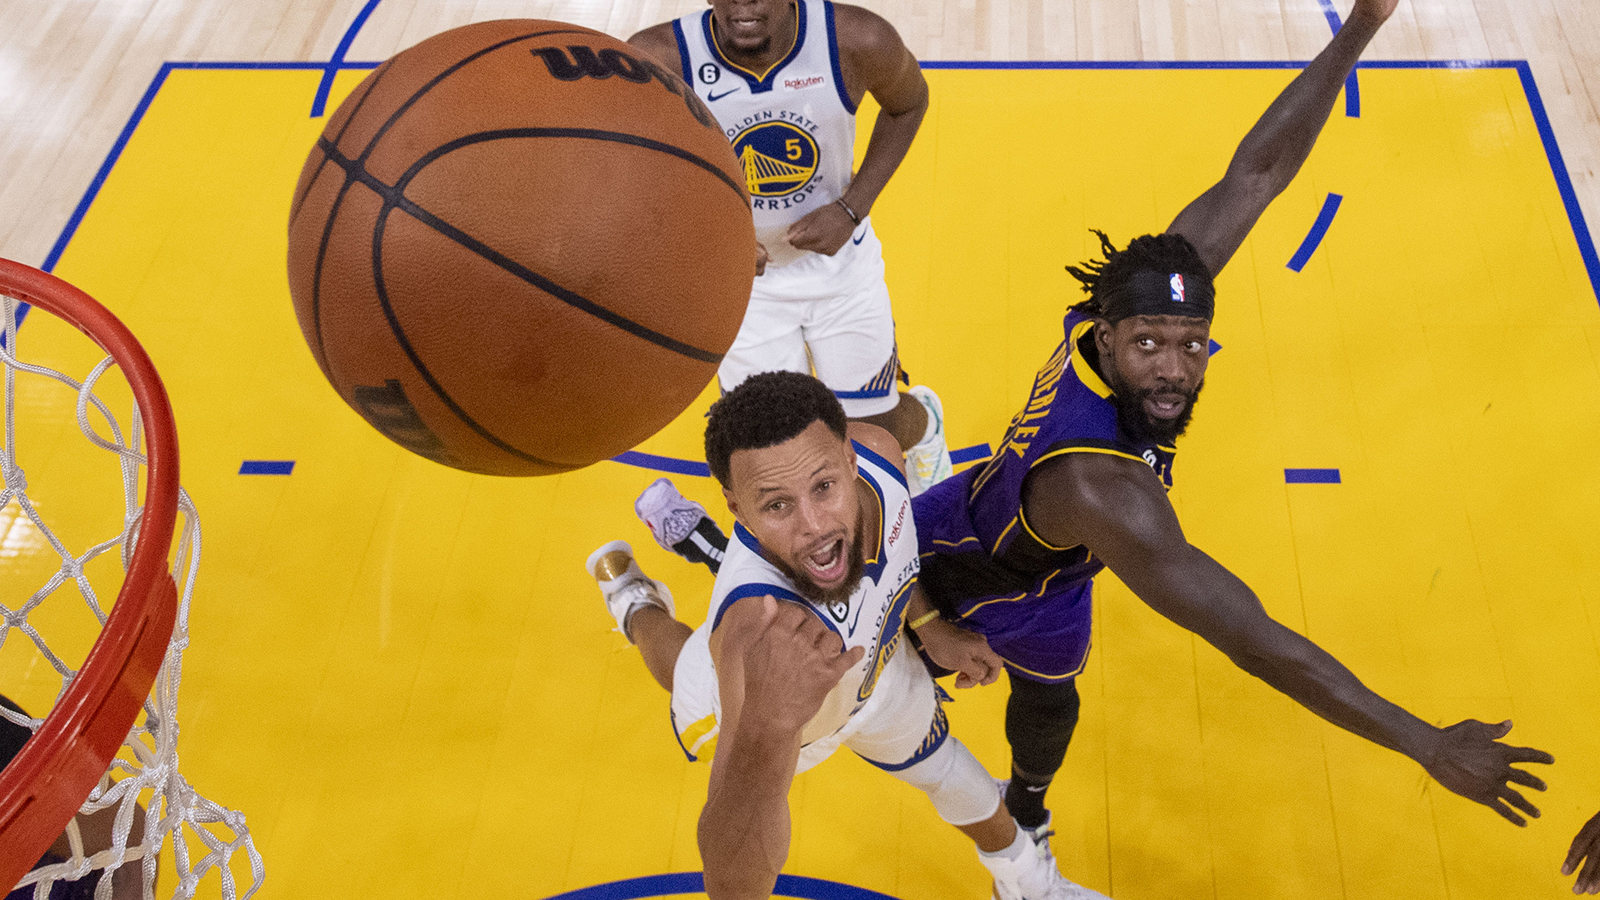 2022-23 NBA Tickets: Warriors and Lakers Remain the Most Expensive